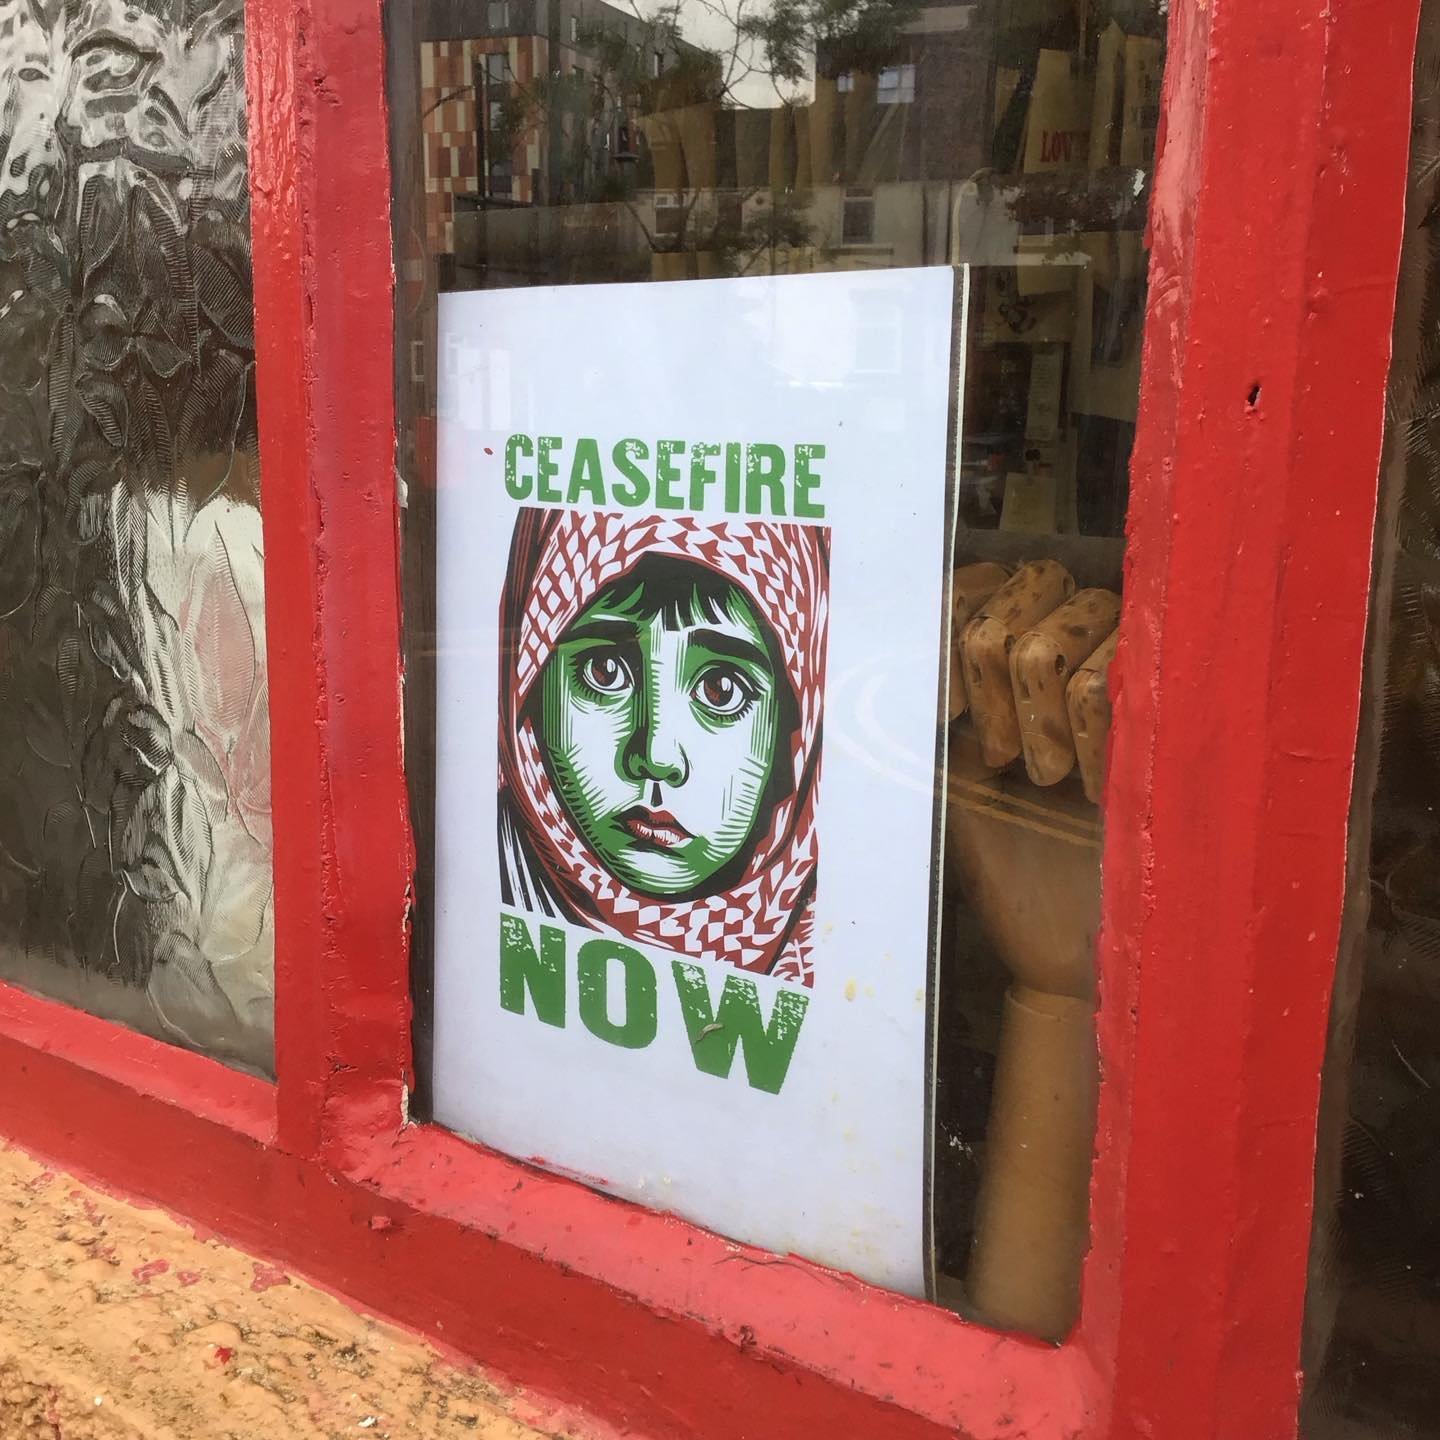 New display in the Incline Press workshop window, wood type and linocut print by @davidcummingprints. It's one of an edition of 25 copies, and the price includes a donation to @doctorswithoutborders. Contact @davidcummingprints directly to see if he'